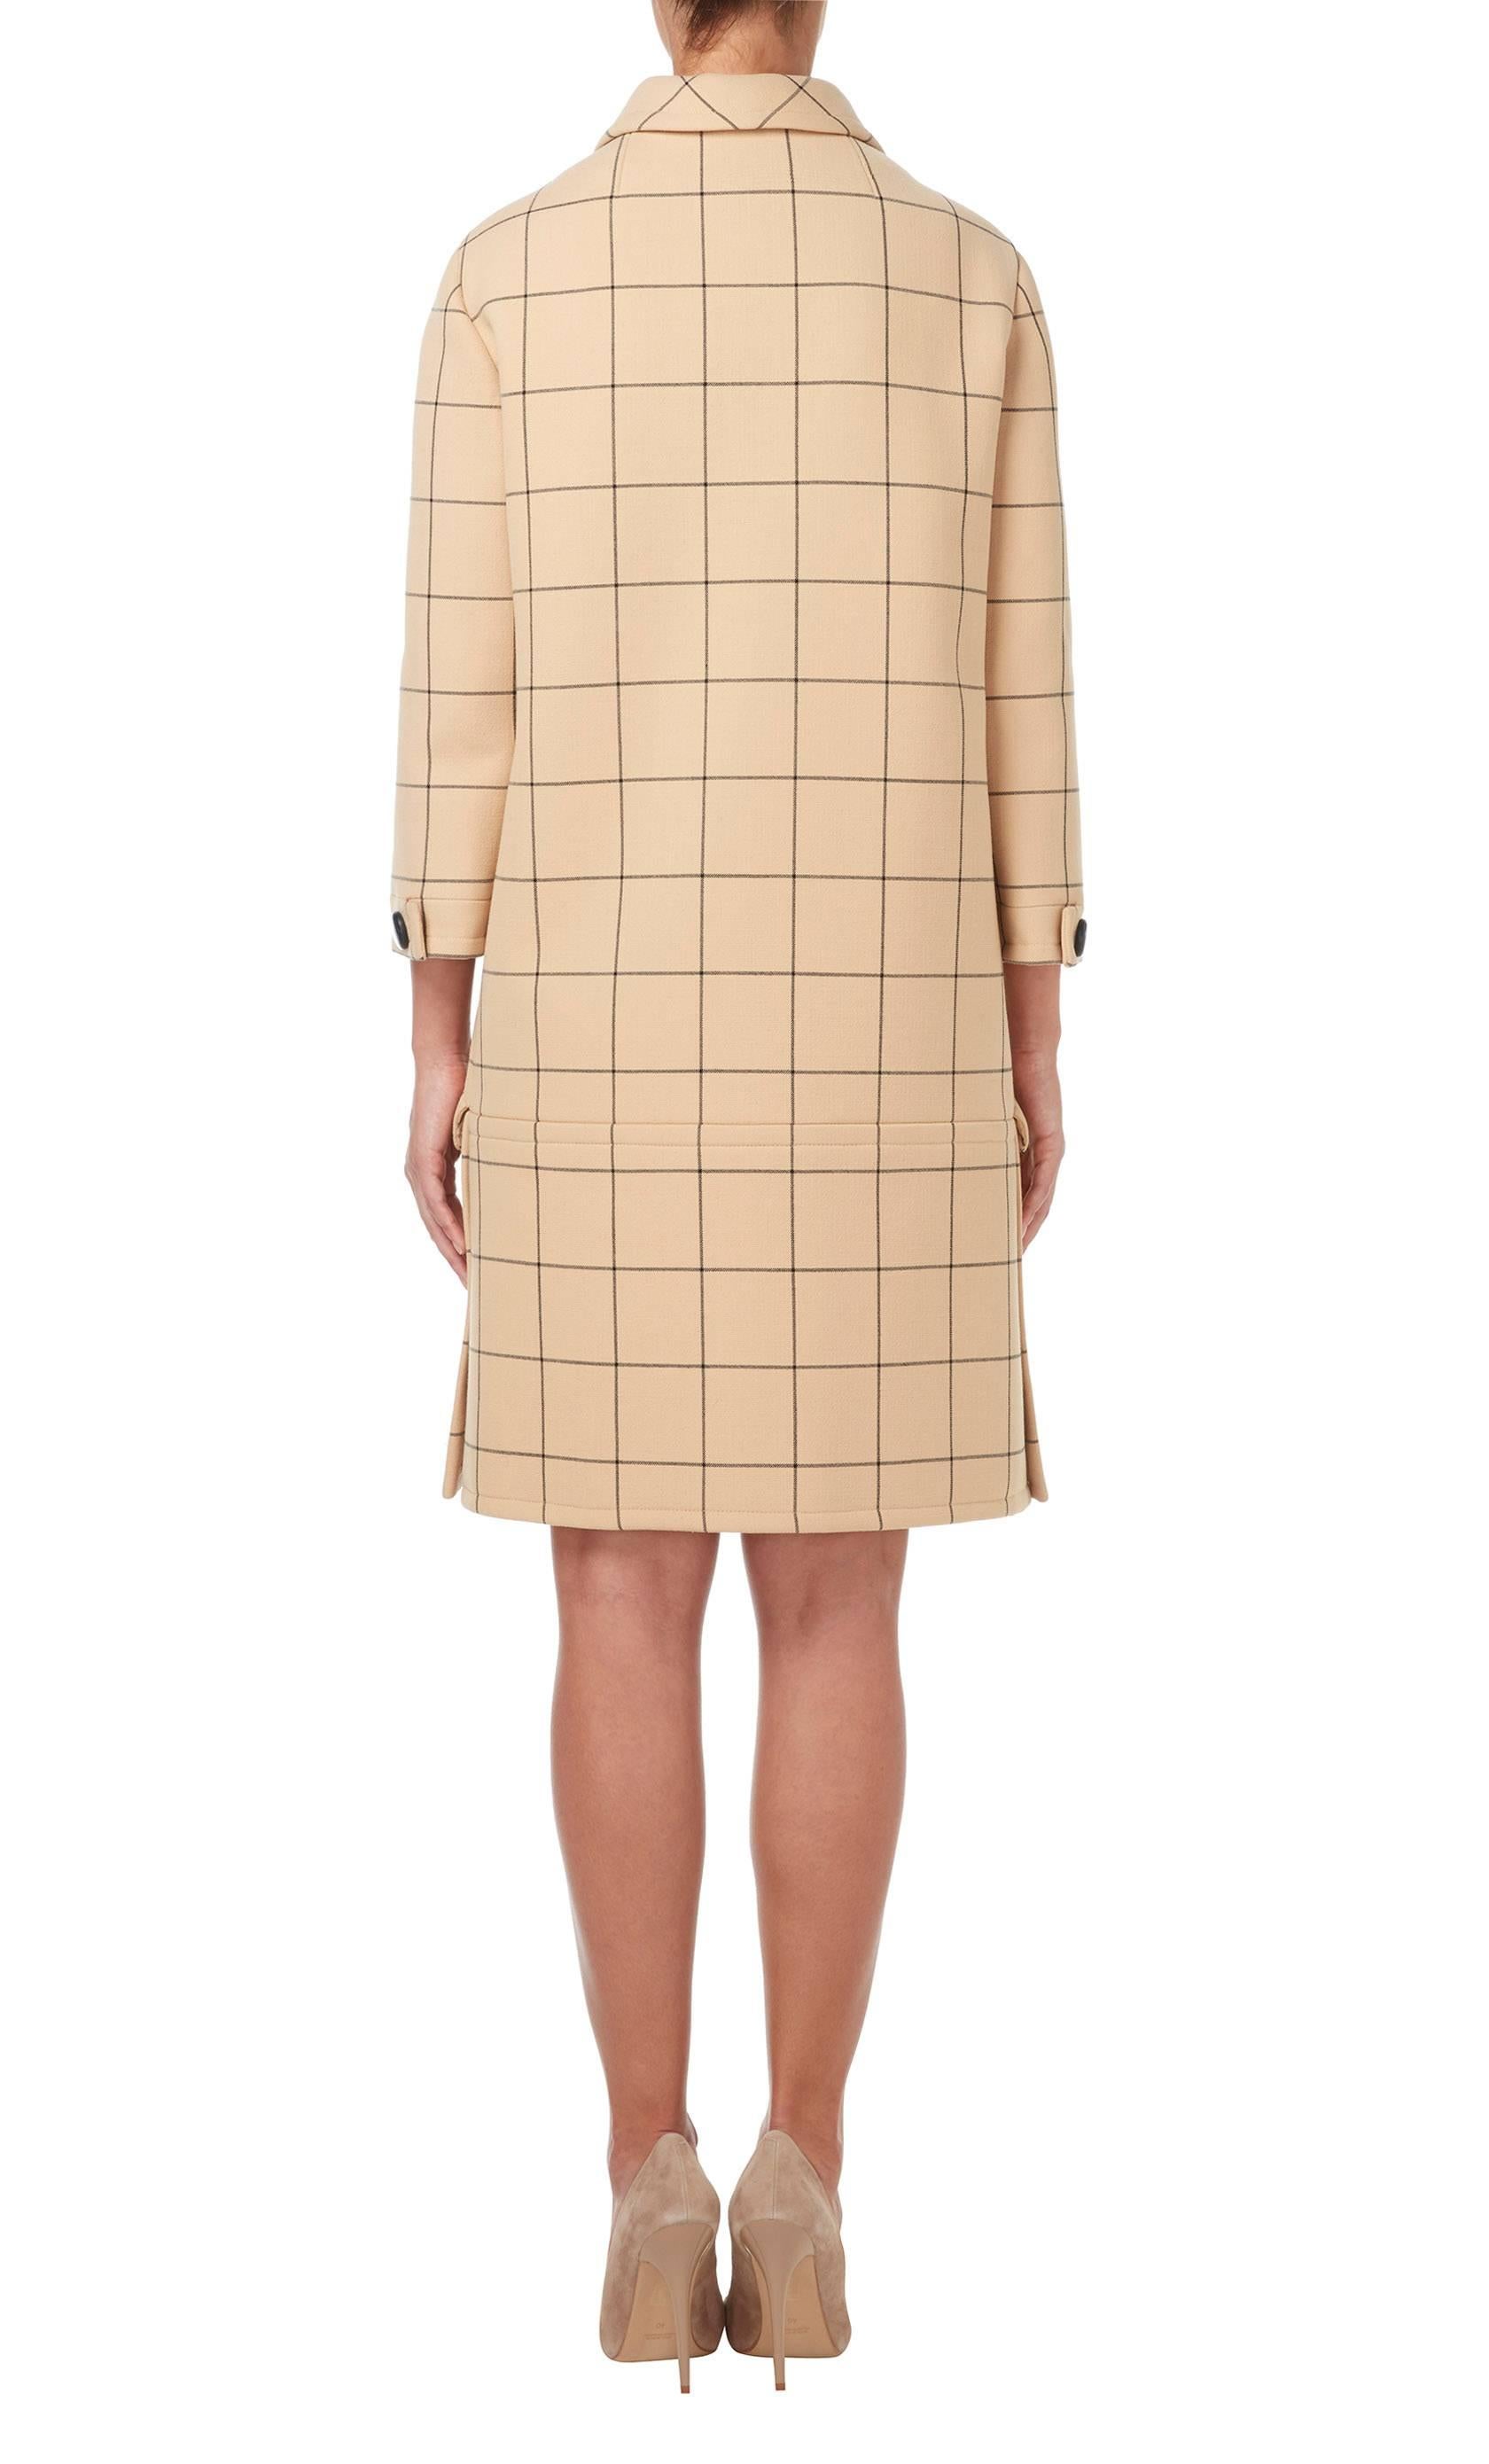 This beautifully cut coat, in light brown wool with a black windowpane check, is a fantastic piece for Autumn and Winter. Worn with knee high boots and a hat, this coat will keep you warm whilst staying chic. The boxy silhouette is contrasted with